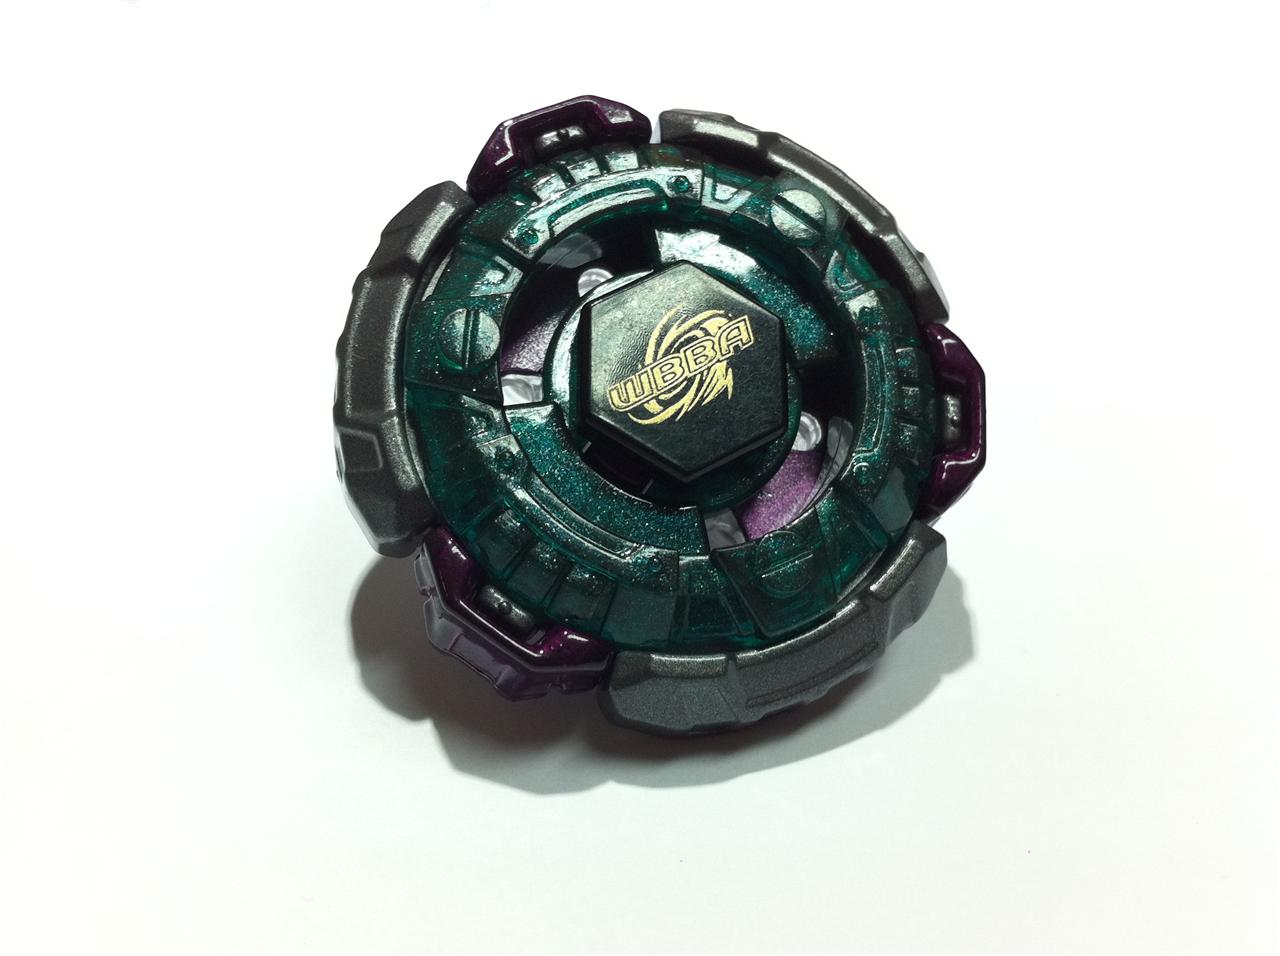 Beyblade Leone 978 Hd Wallpapers in Cartoons   Imagescicom